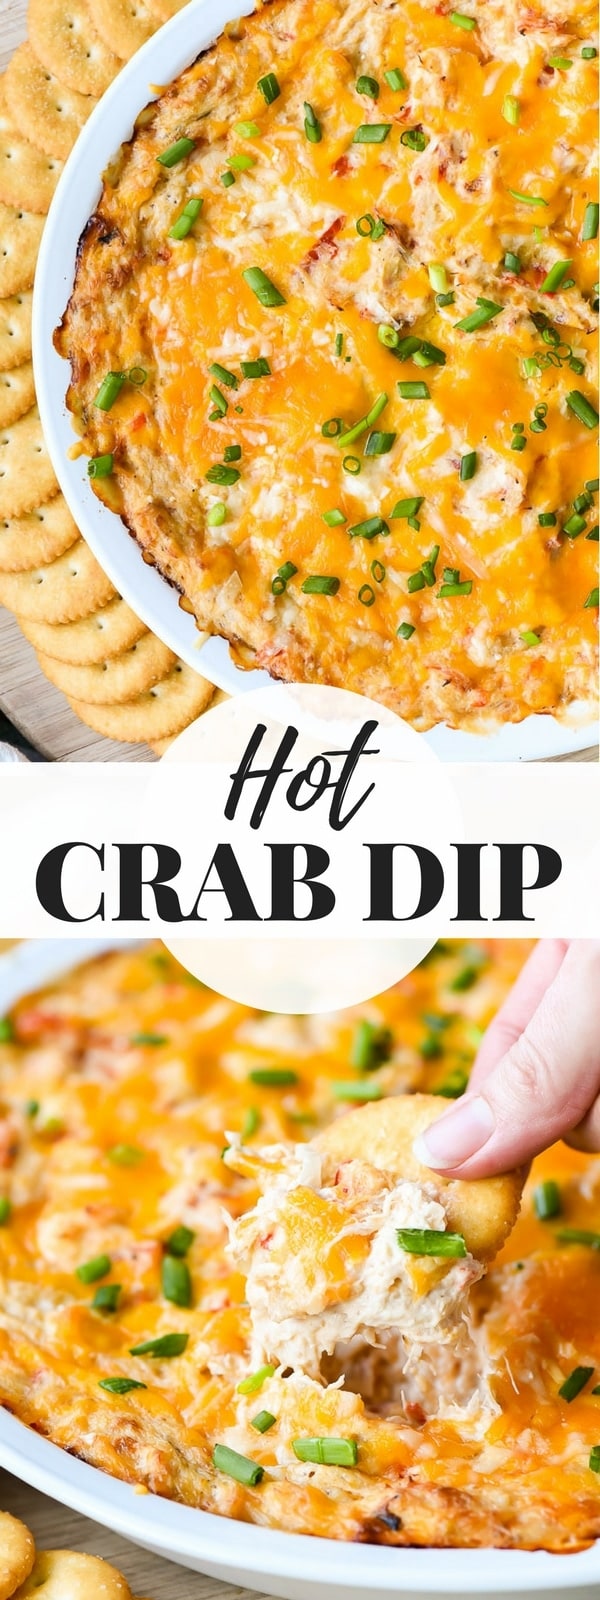 This cheesy, ultra creamy Hot Crab Dip gets a sweet and tangy kick from a special ingredient! This appetizer will disappear at parties!